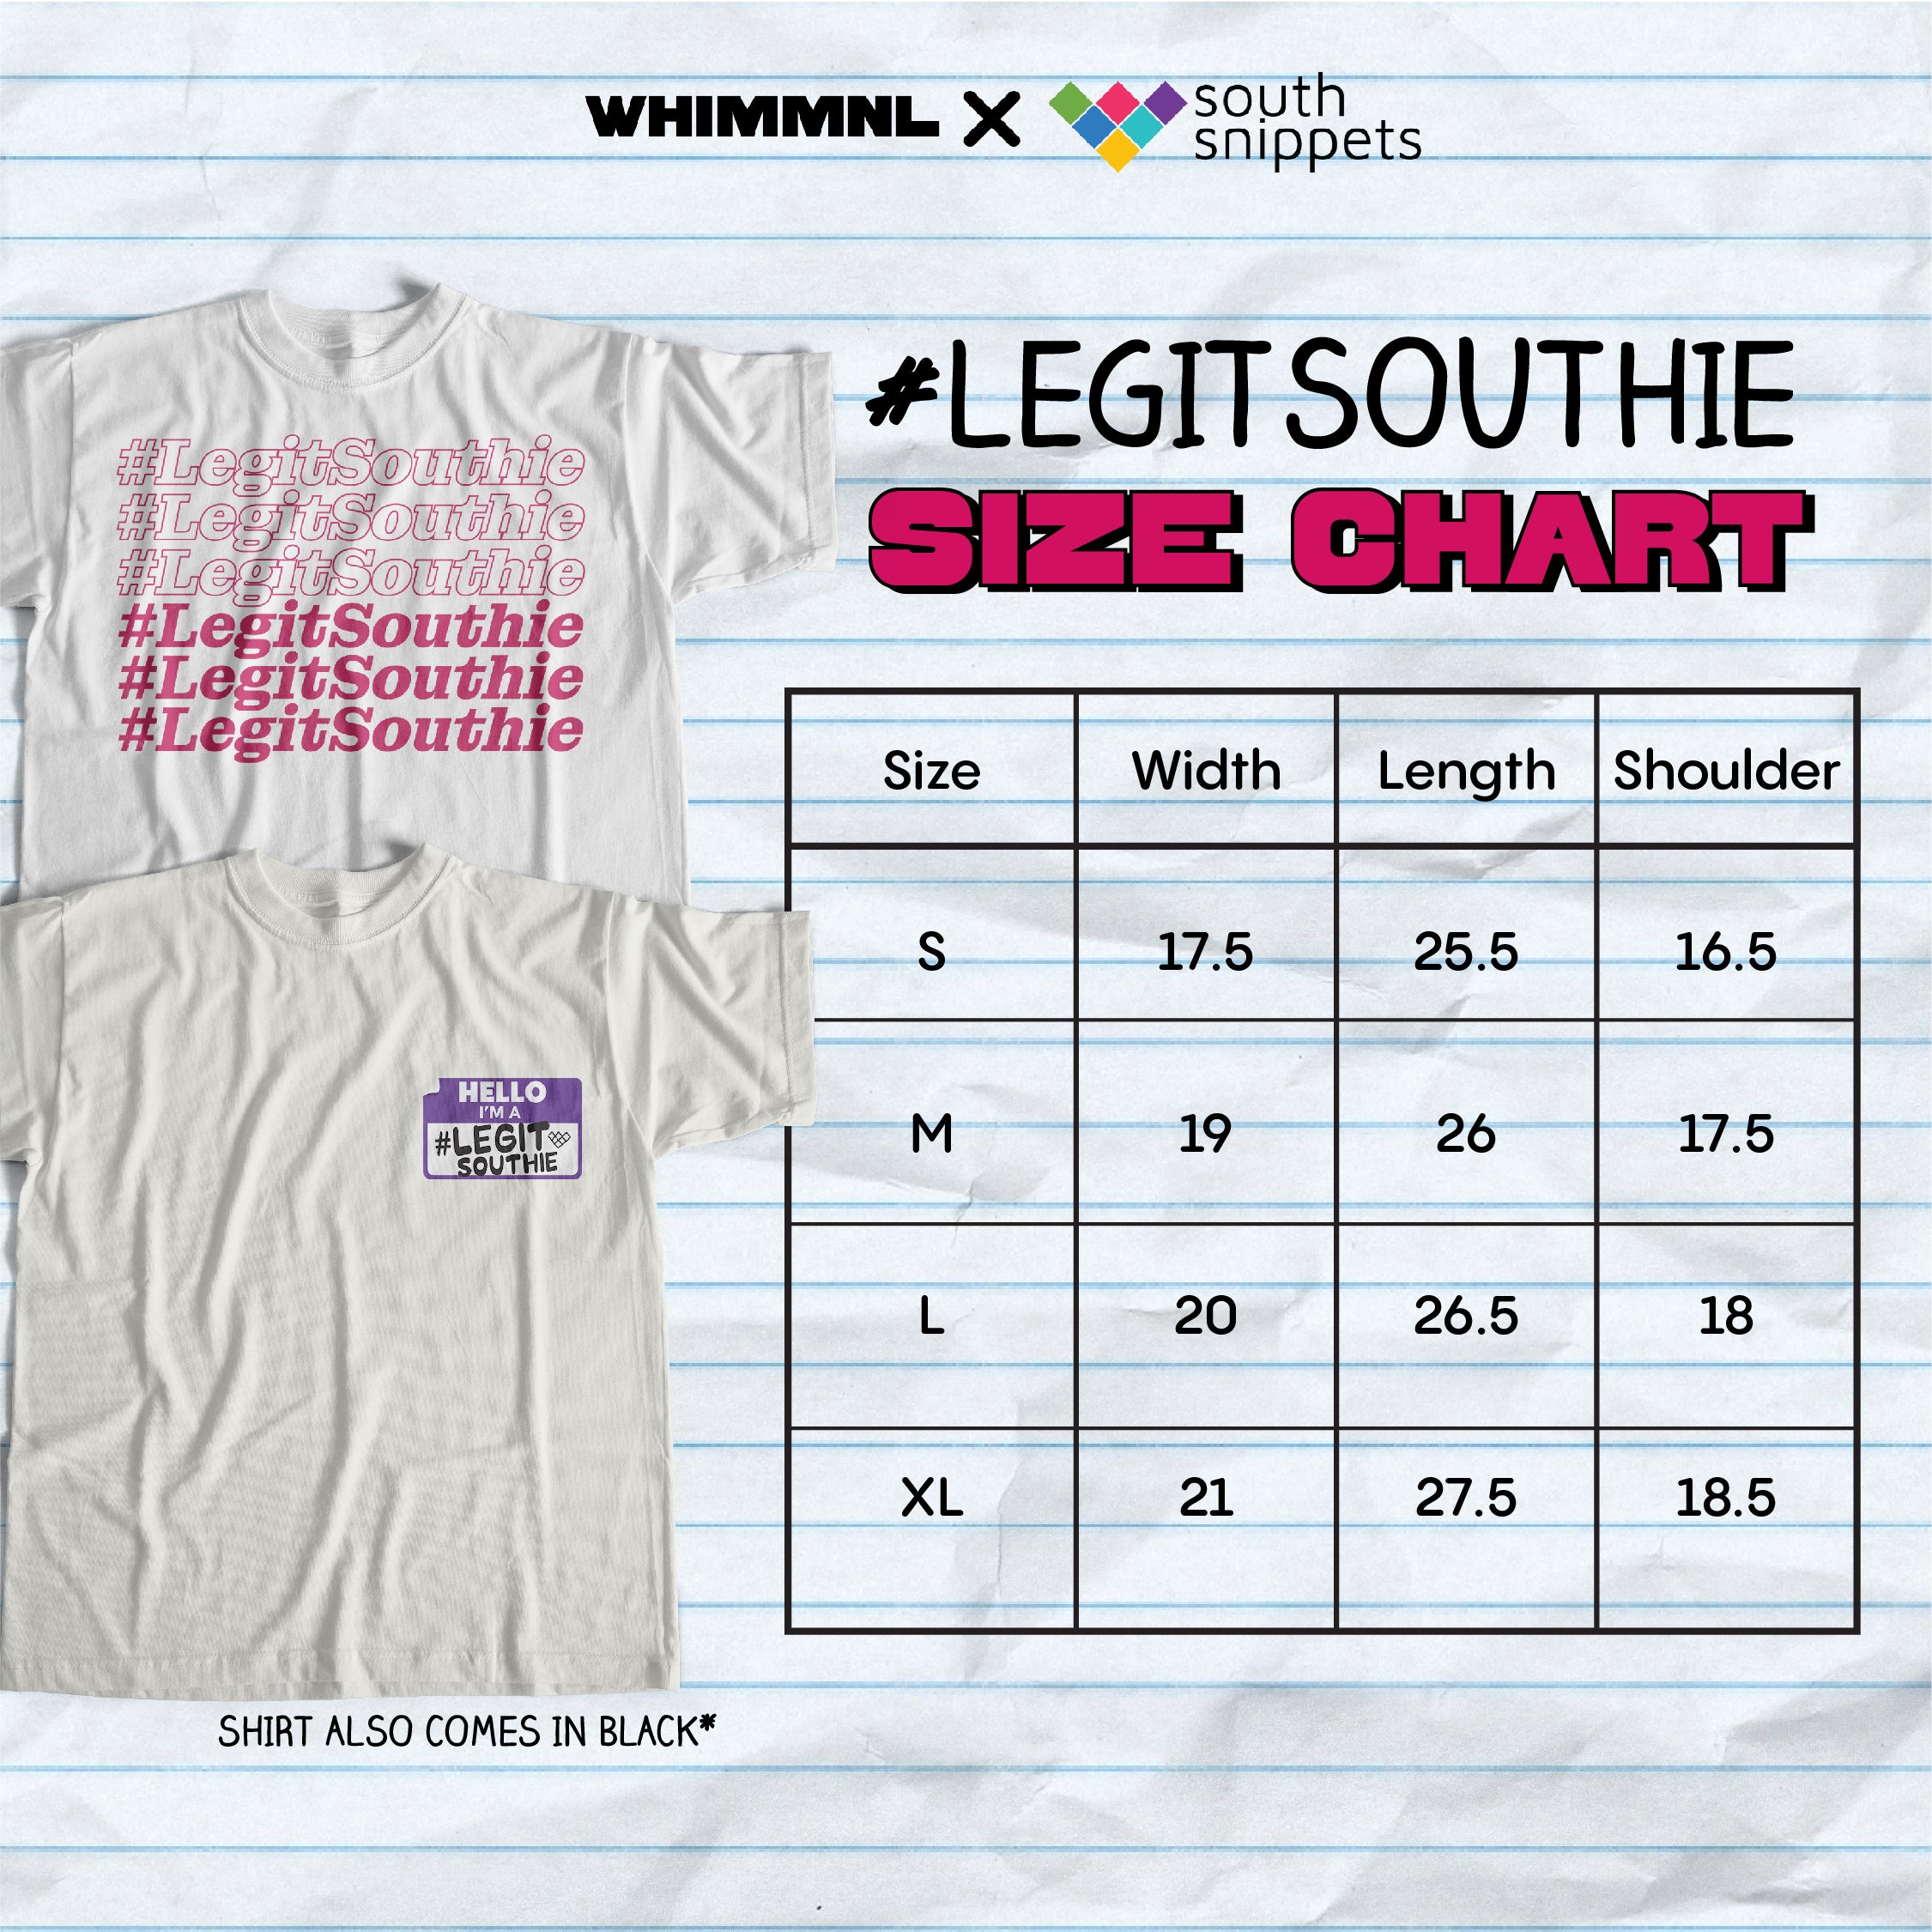 [Whim x South Snippets] #LegitSouthie Name Tag Shirt in Black